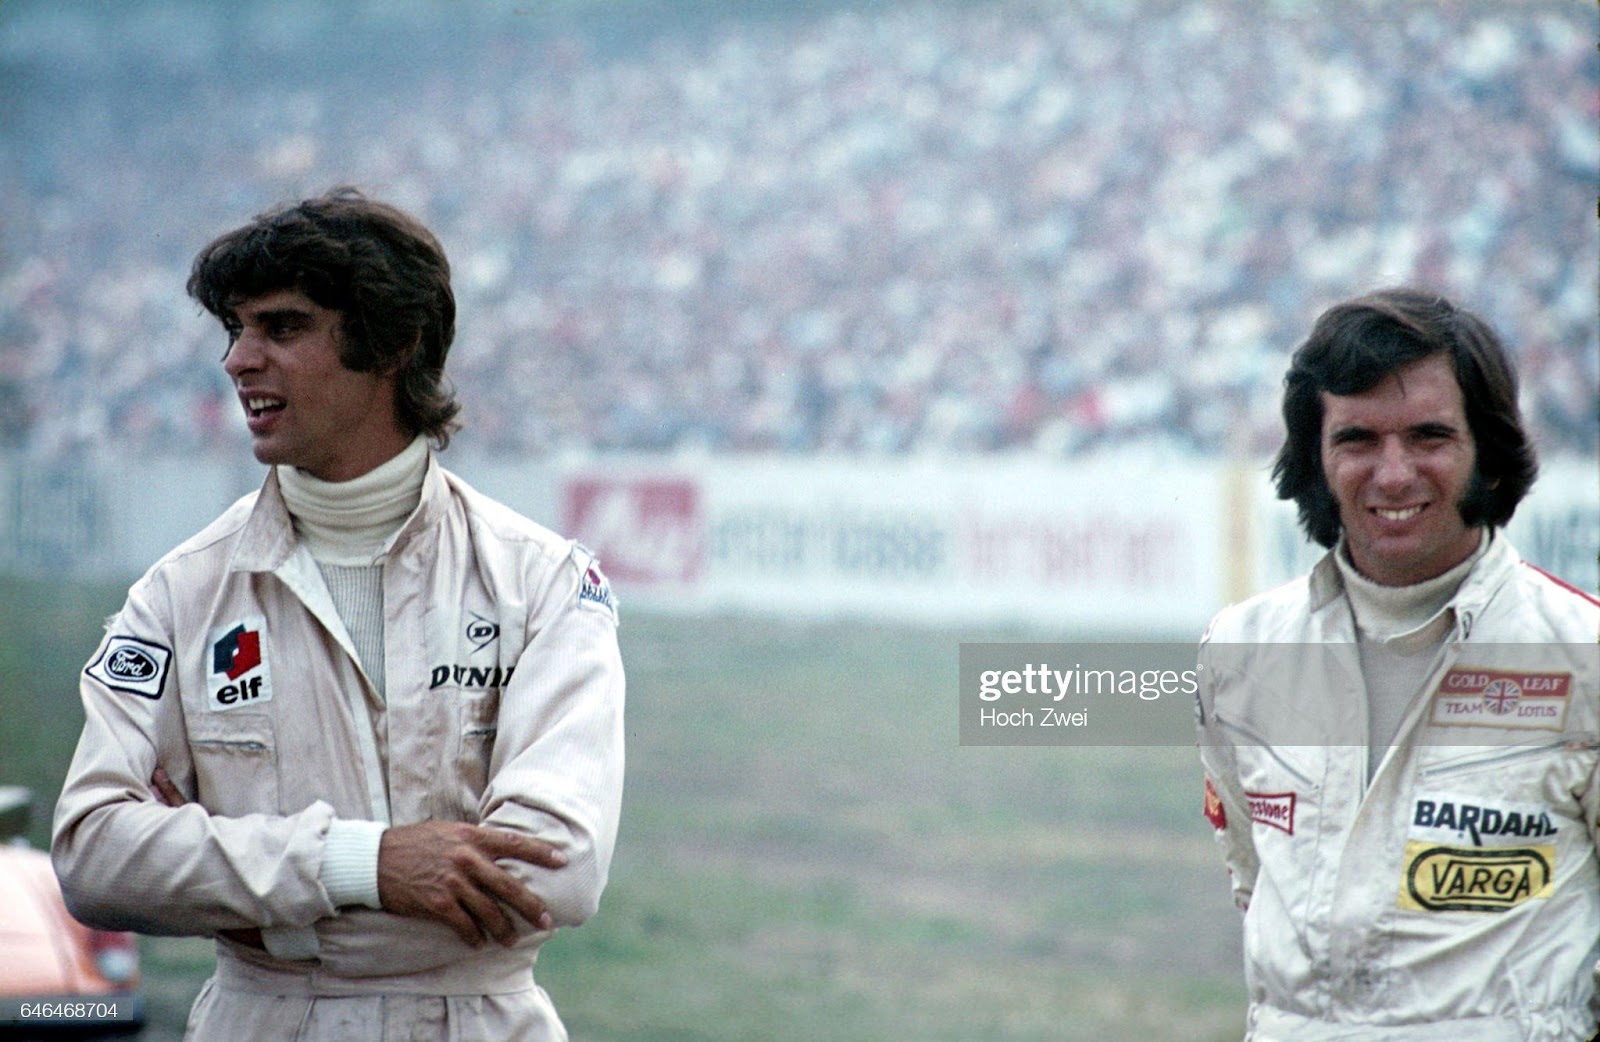 Francois Cevert and Emerson Fittipaldi at the German Grand Prix, Hockenheimring, August 2nd, 1970. 